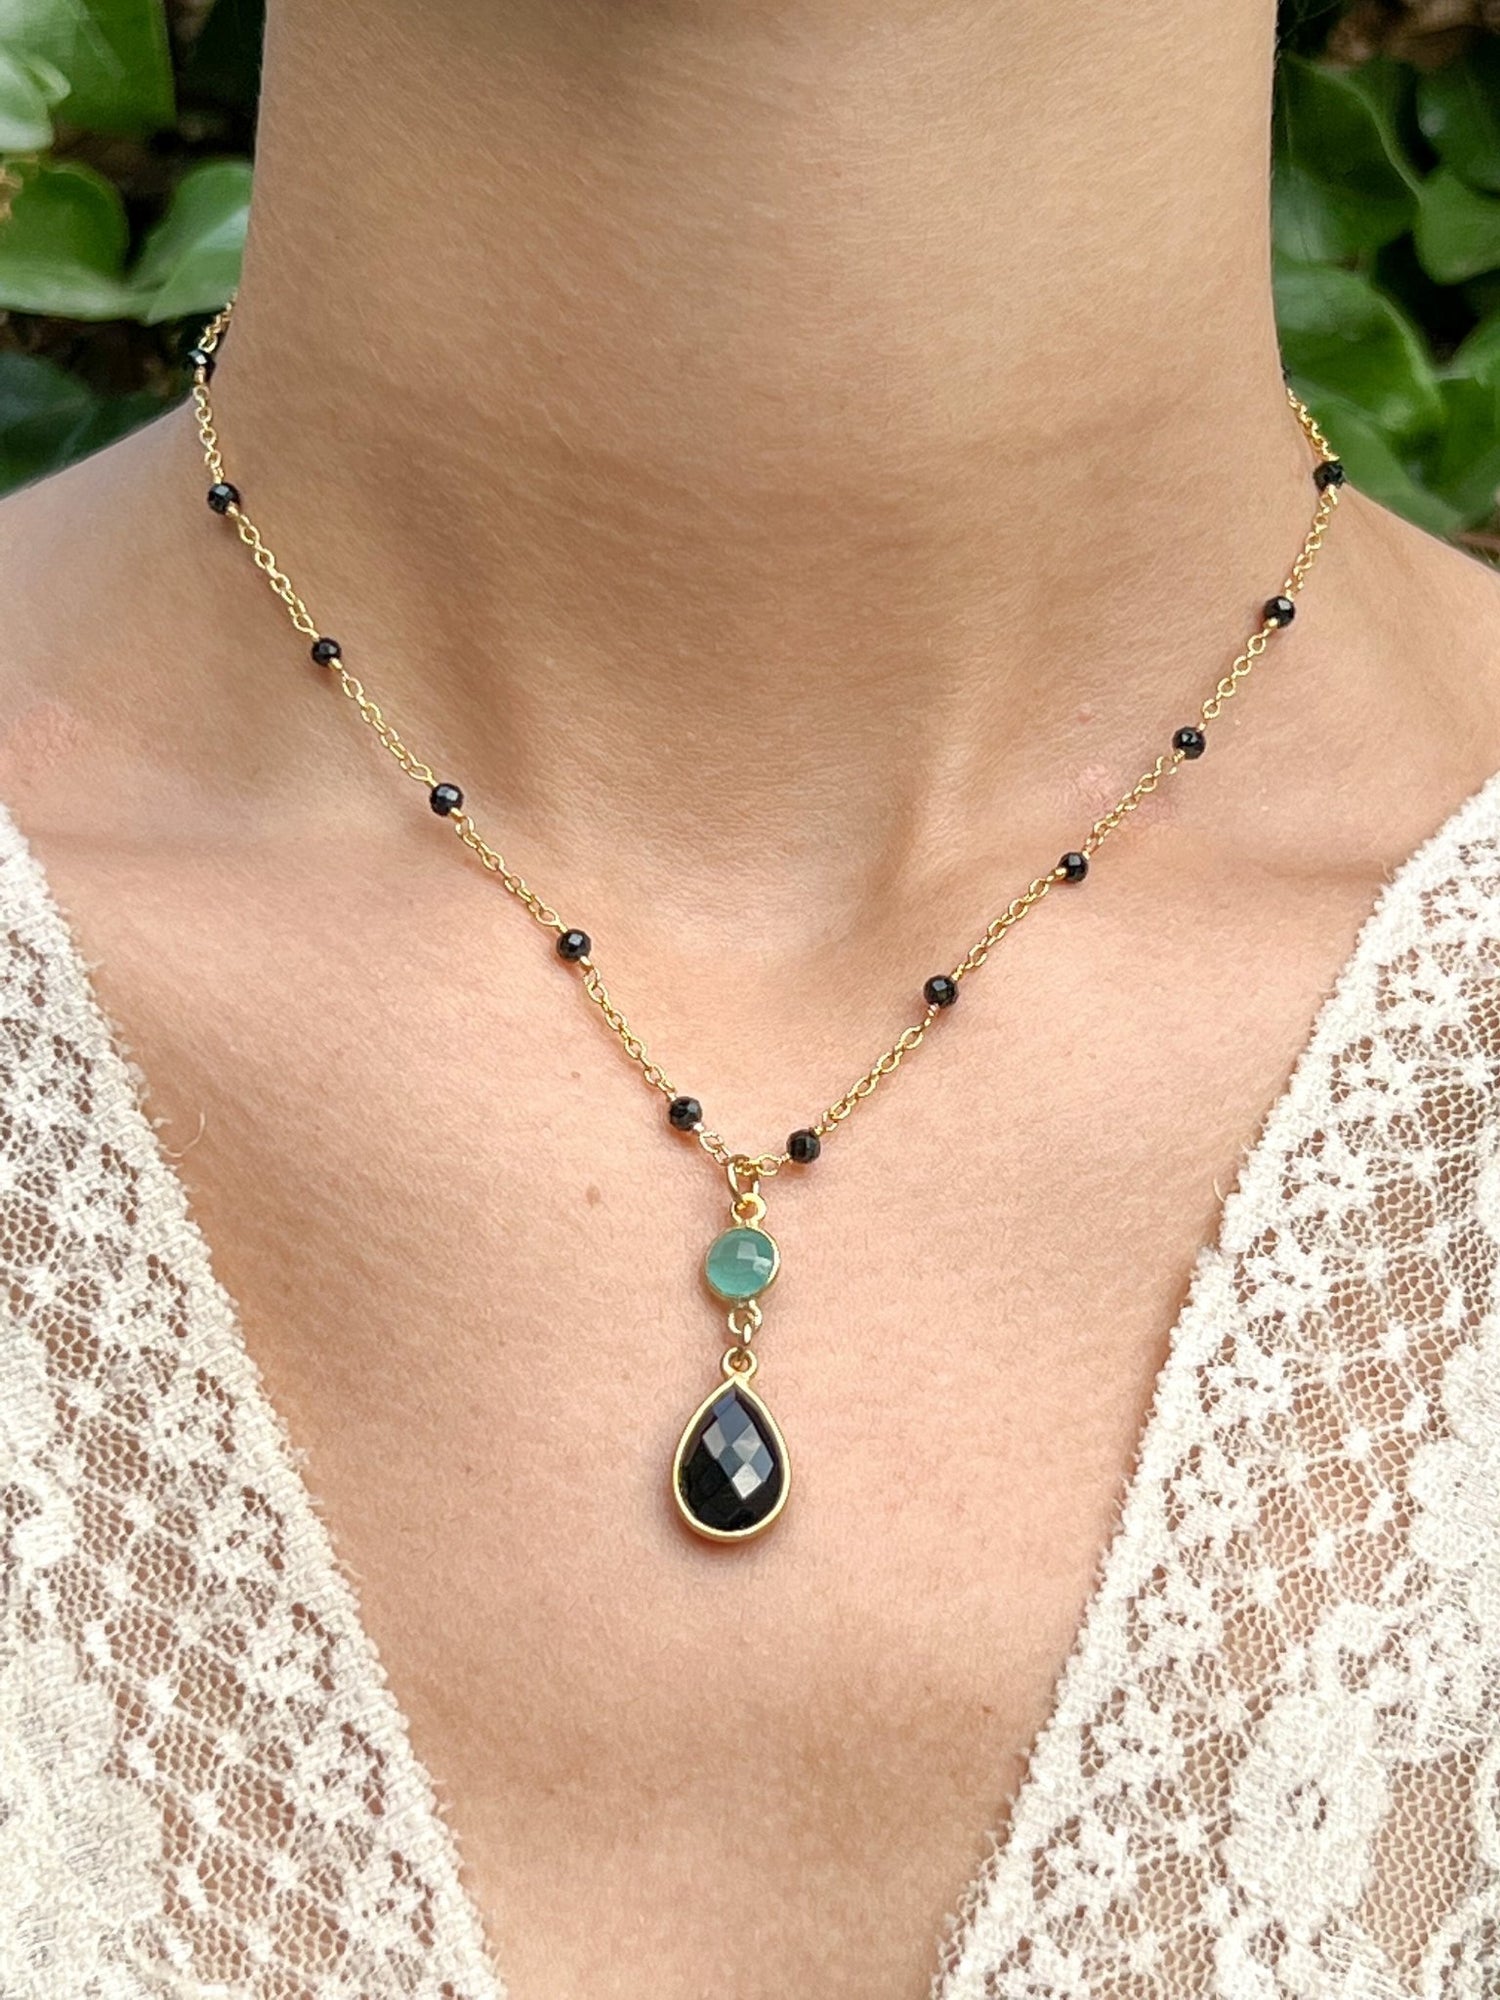 Black Onyx and Chrysoprase Double Drop Pear Shaped Pendant Necklace on Gold Chain with Black Onyx by Sage Machado - The Sage Lifestyle